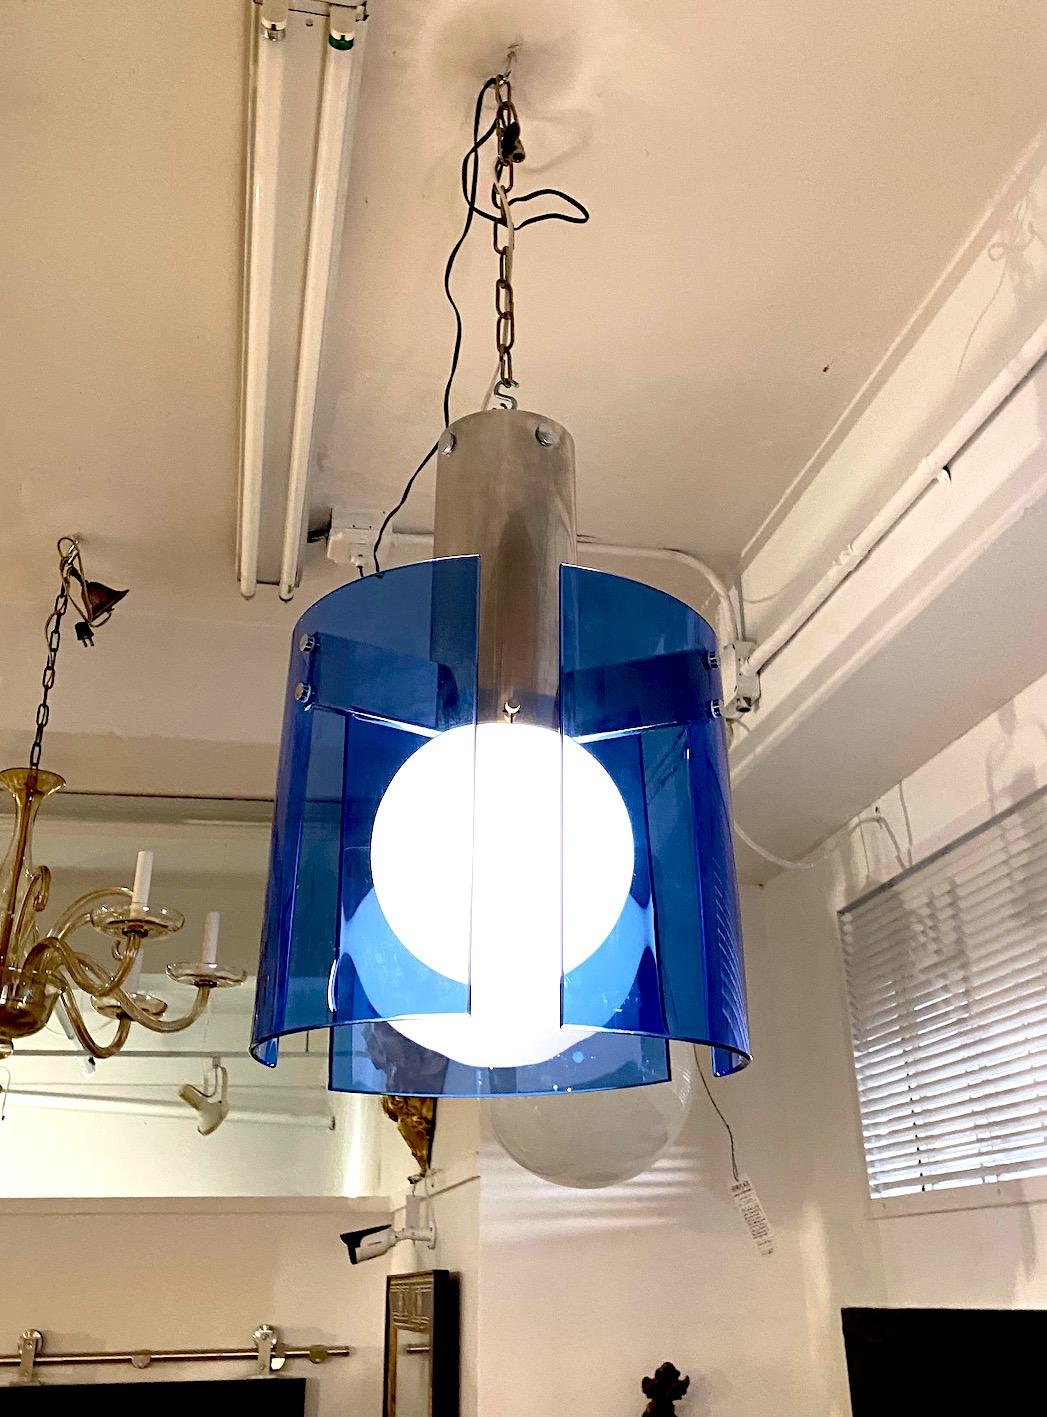 An elegantly designed 1970s ceiling mount pendant light by Italian lighting company Veca. Three hand formed cobalt blue glass panels attach to the central chrome column by three rectangular chrome arms. The light may be mounted directly onto the